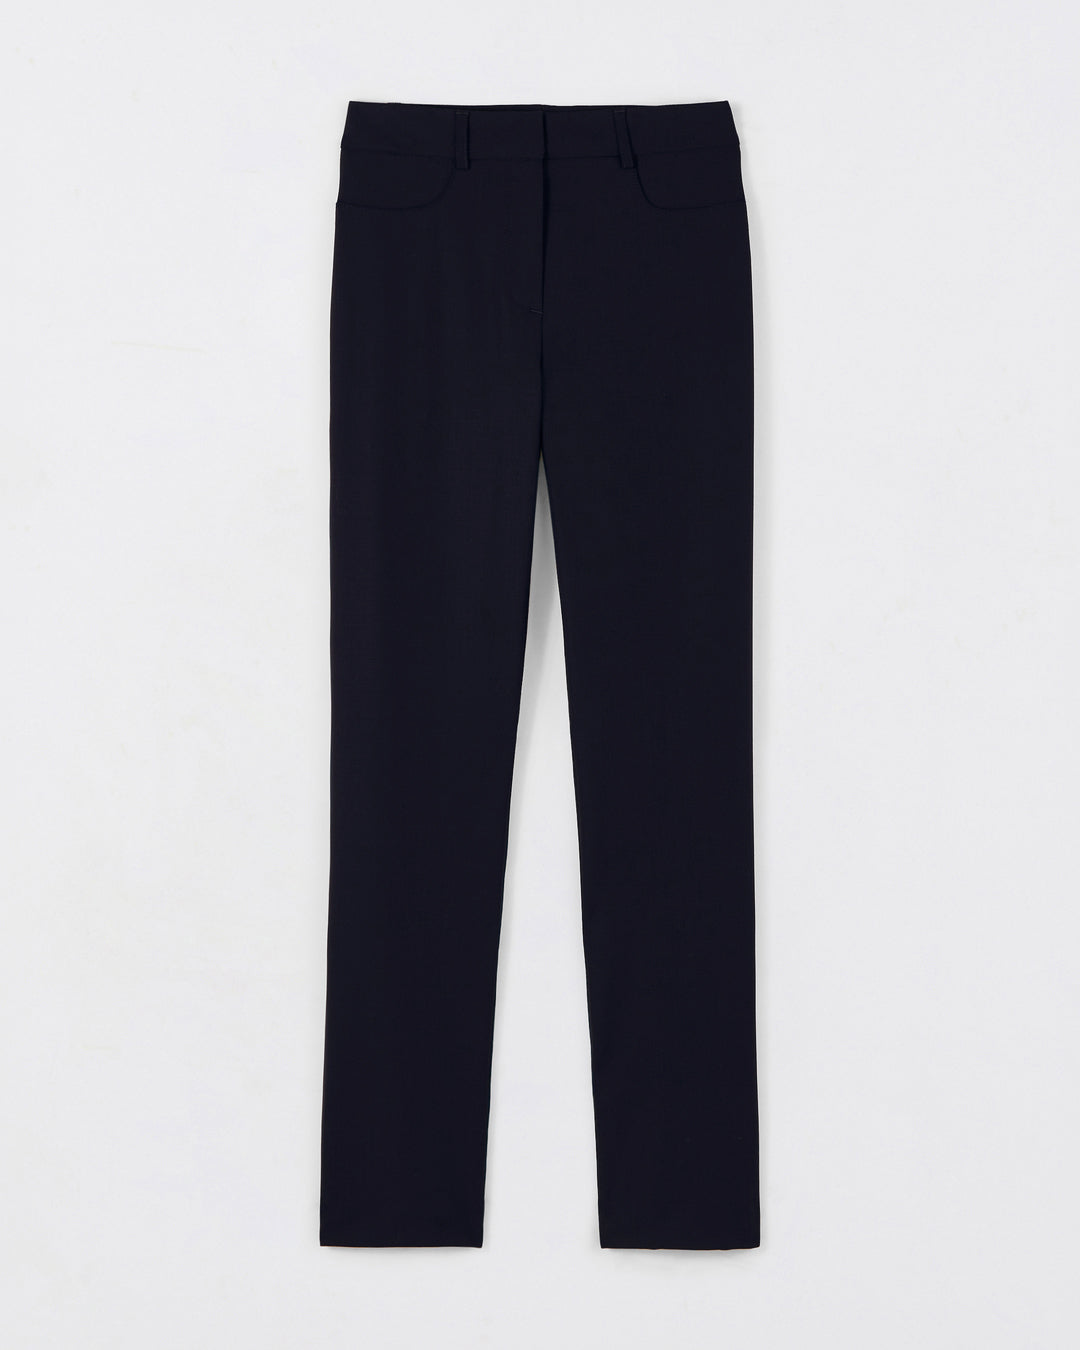 "Navy-blue trouser-tailor-Cigarette-cutter-Mid-rise-waist-Faux-cavalier-pockets-in-front-Wired-poise-pockets-in-back-Passing-for-belt-Zip-and-hook-closure-Camel-tips-17H10-tailor-tailors-for-women-paris-"